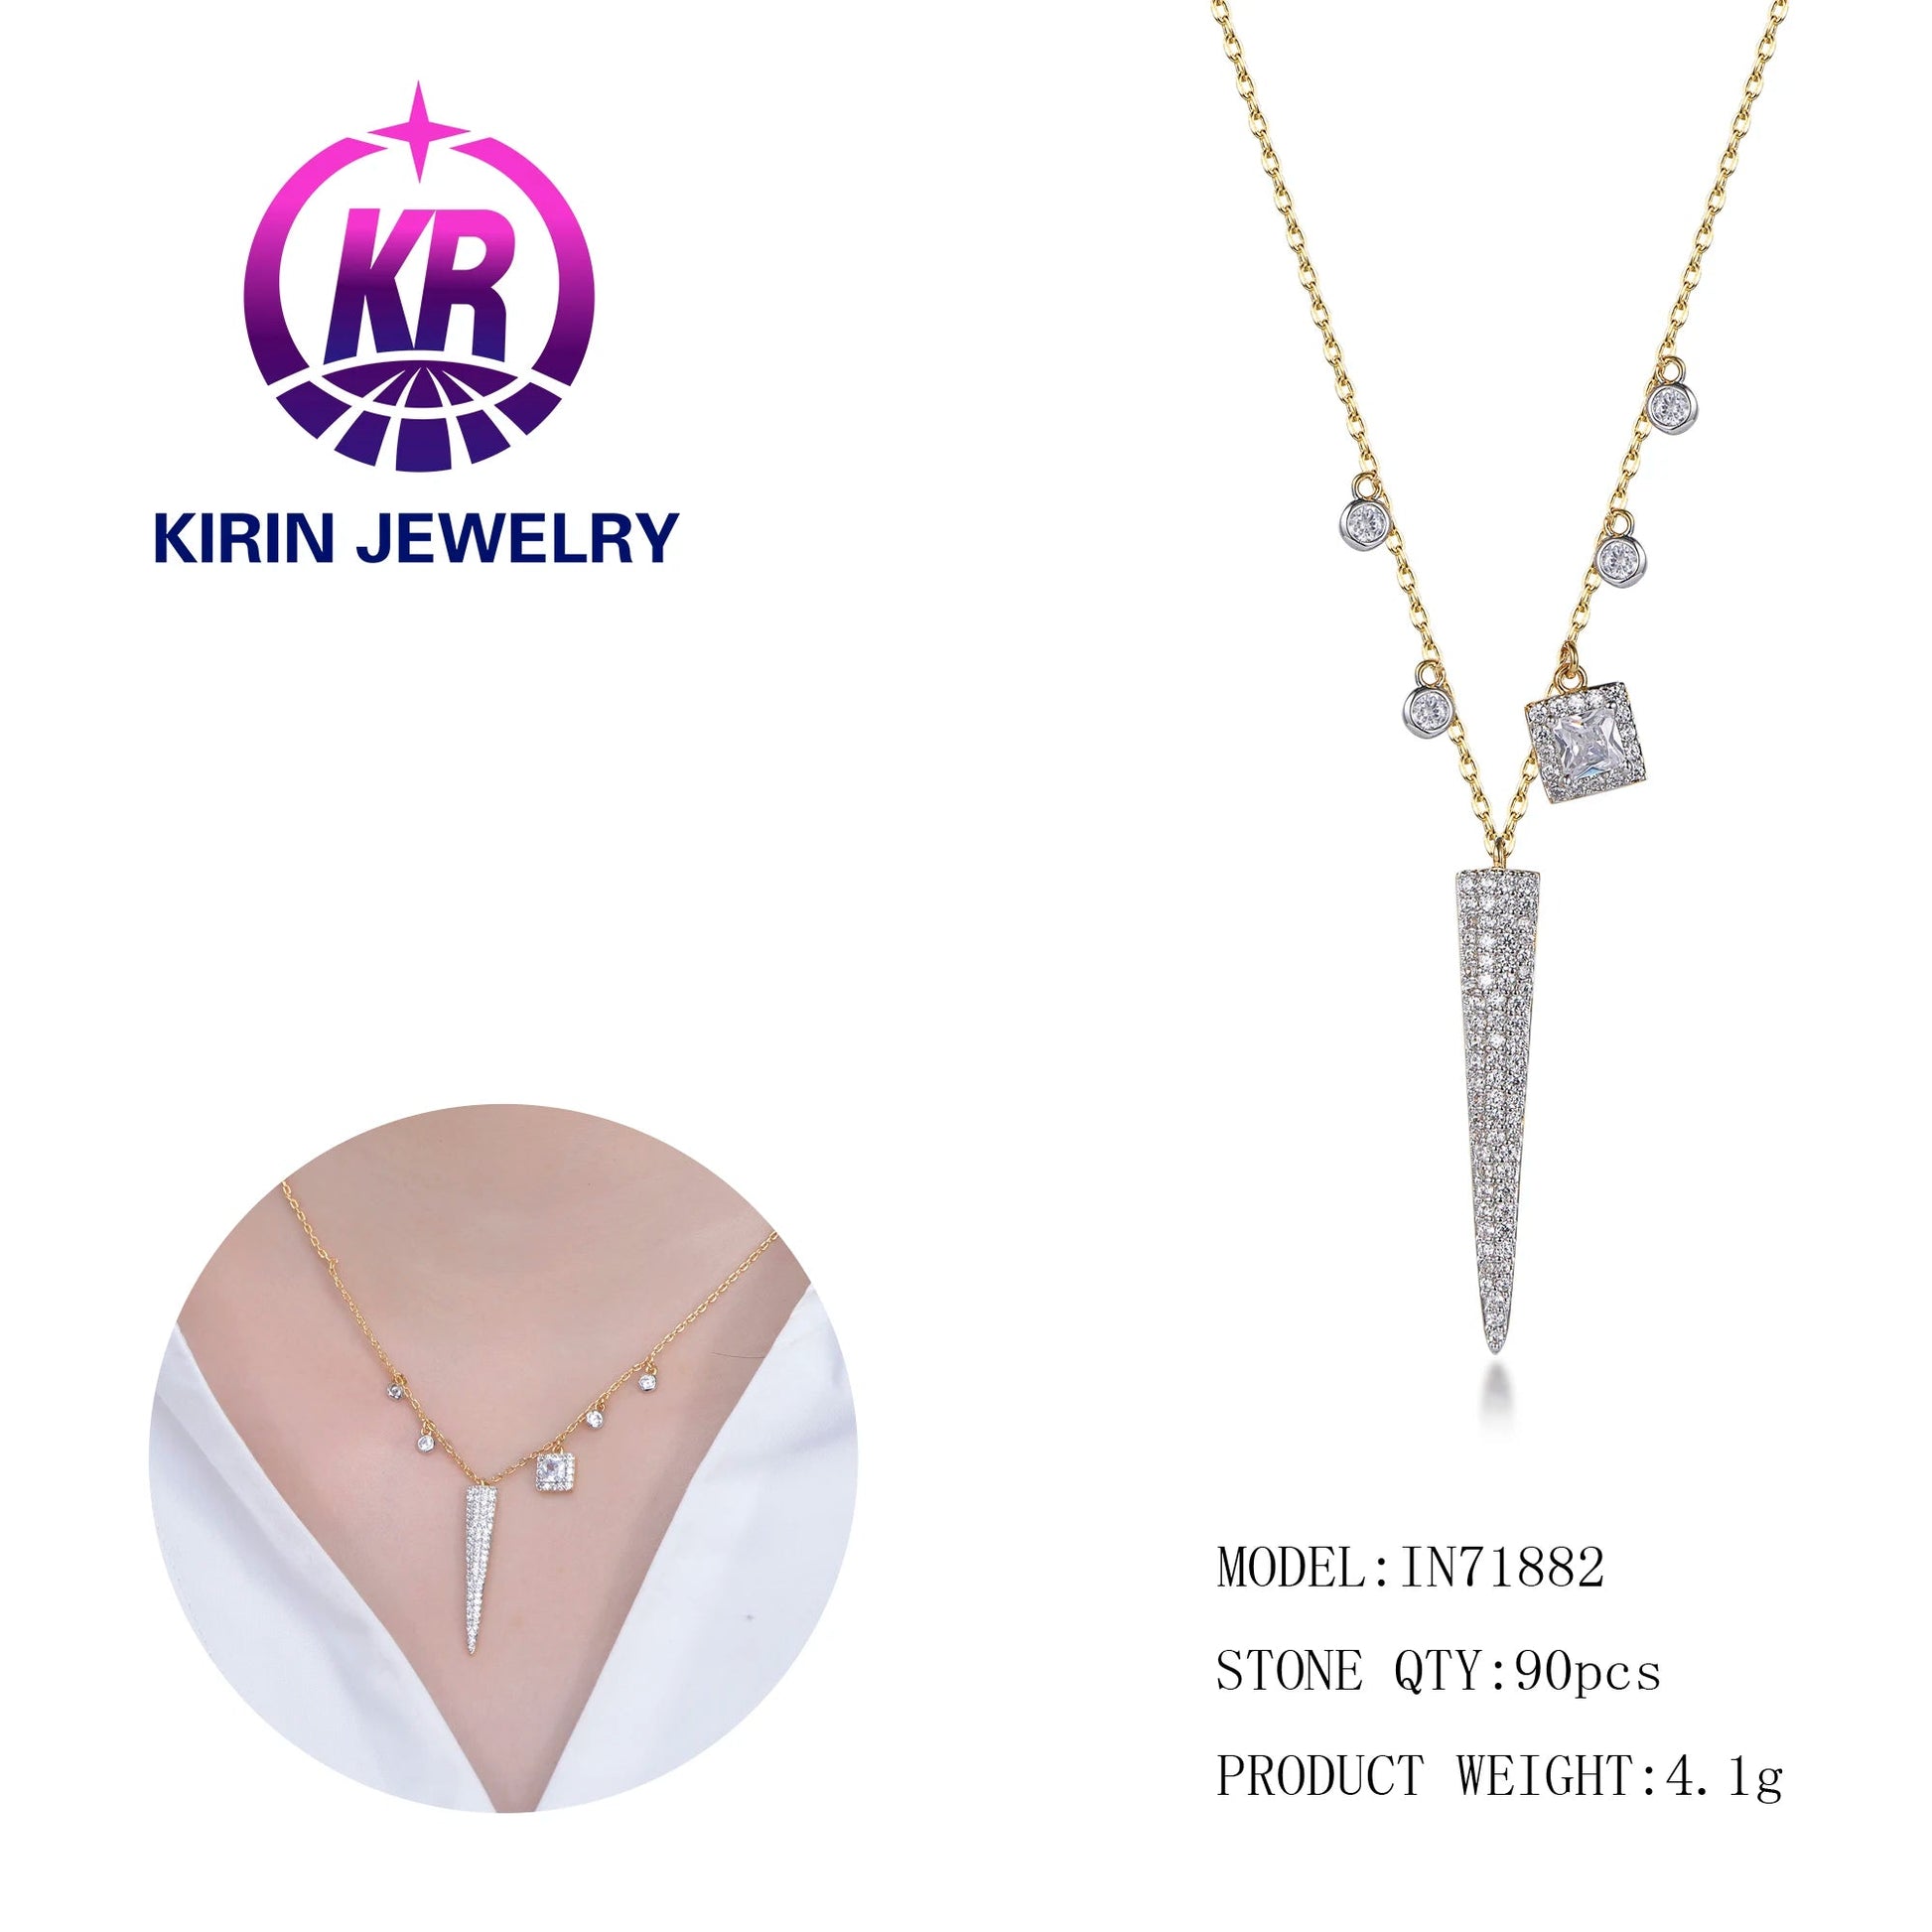 Fashion necklaces wholesale silver 925 jewelry diamond triangle shape pendant gold plate necklace for ladies Kirin Jewelry